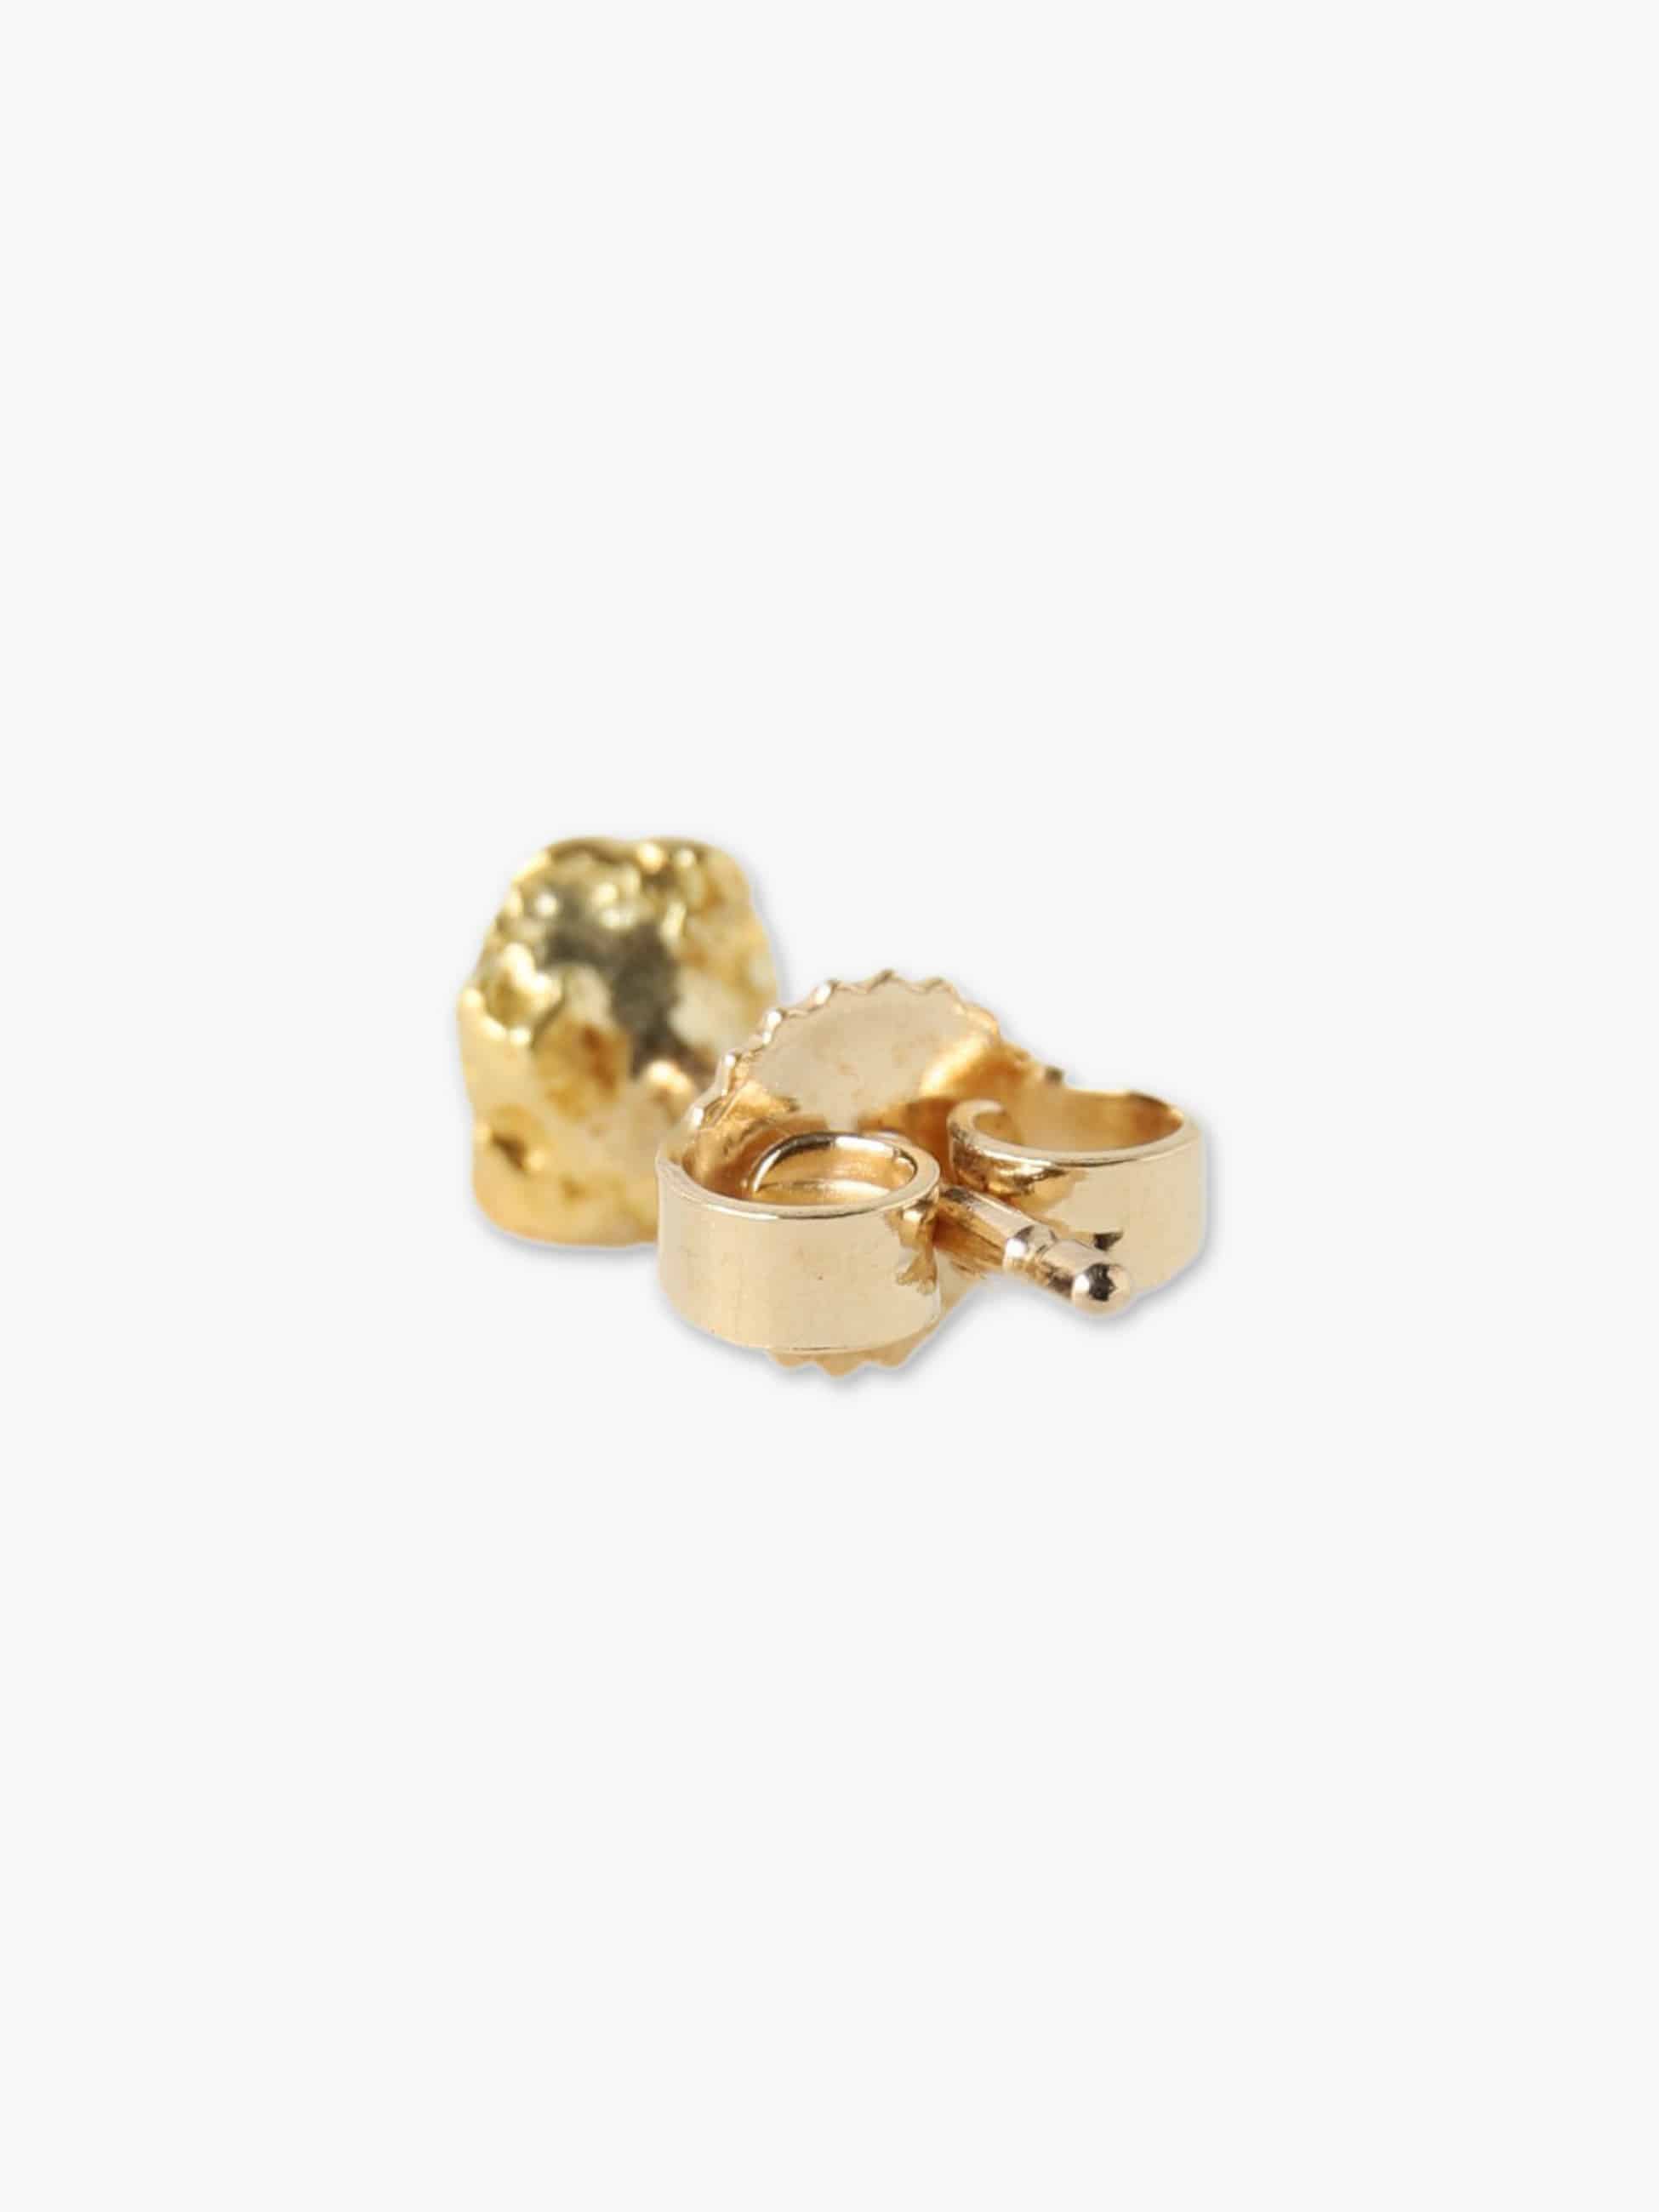 Gold Nugget Pierced Earrings（Large） 詳細画像 yellow gold 2